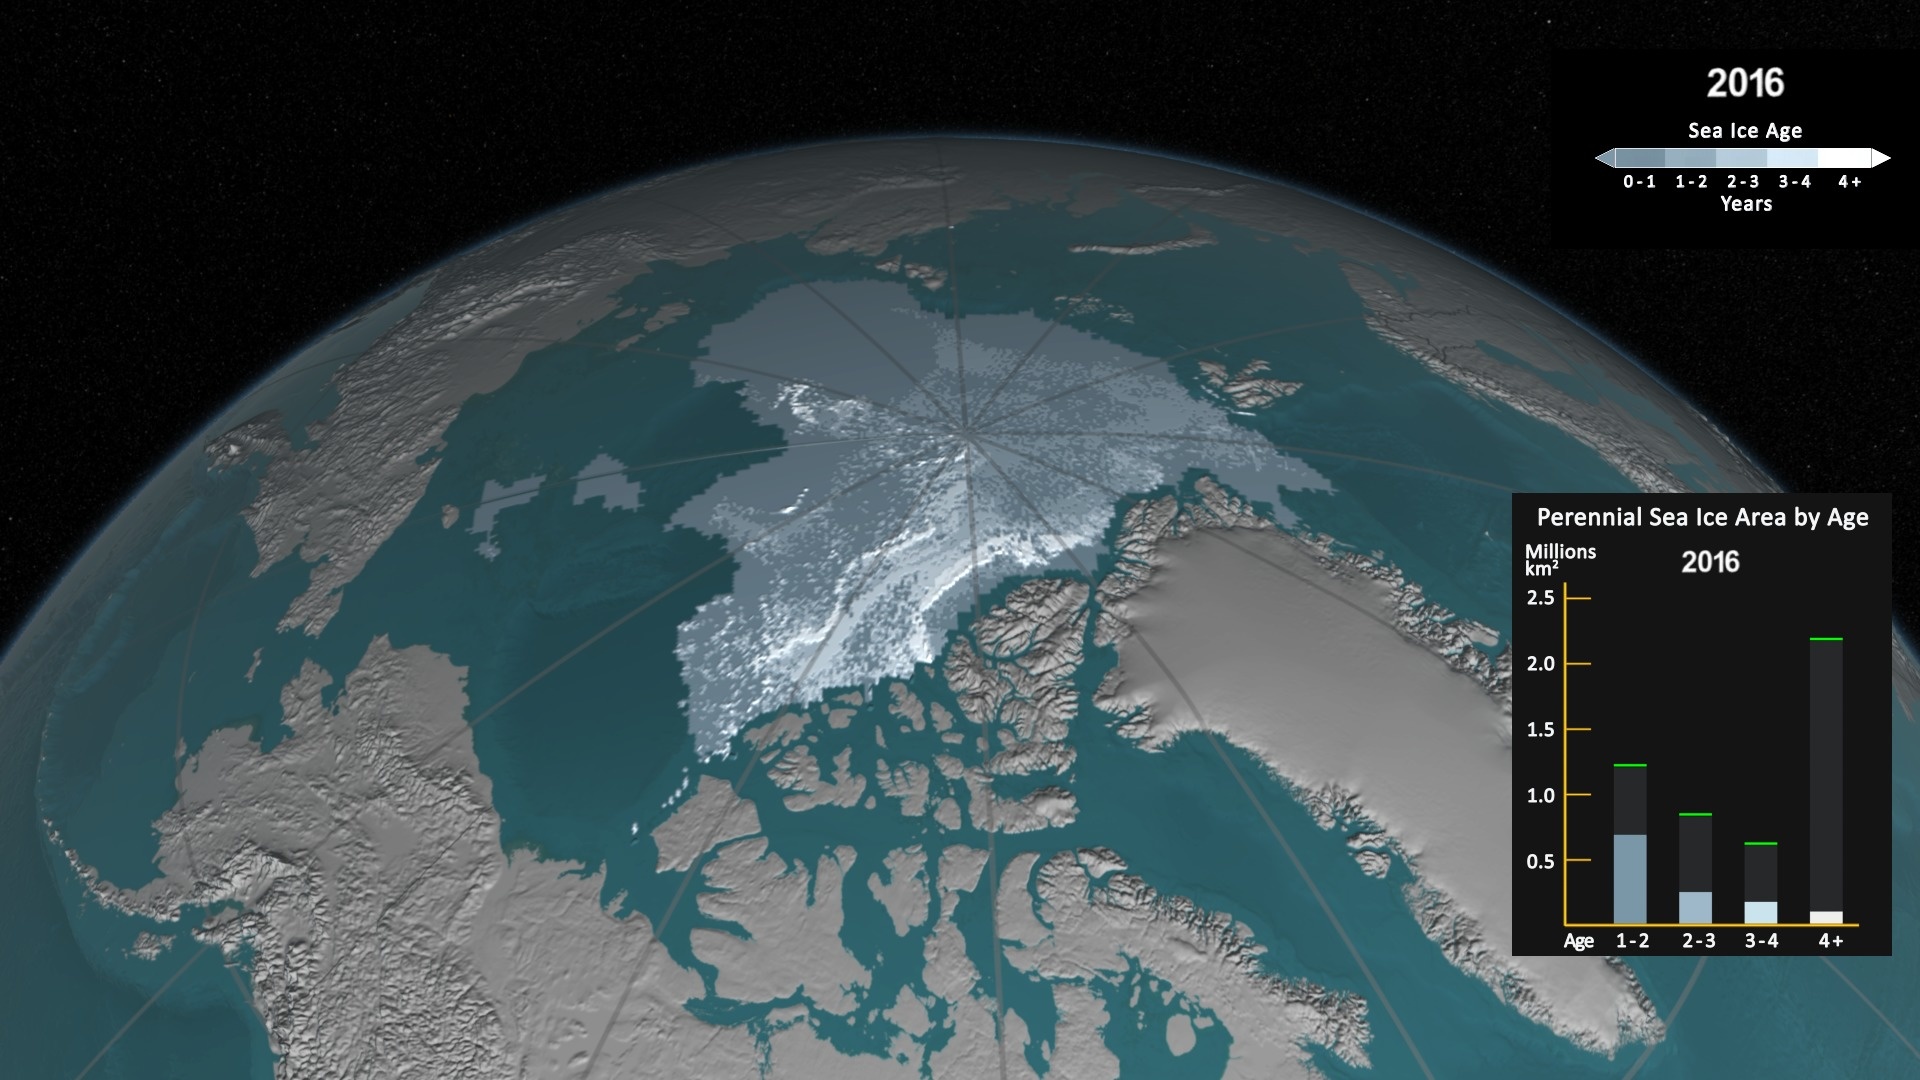 Here's a look at sea ice age in 2016.